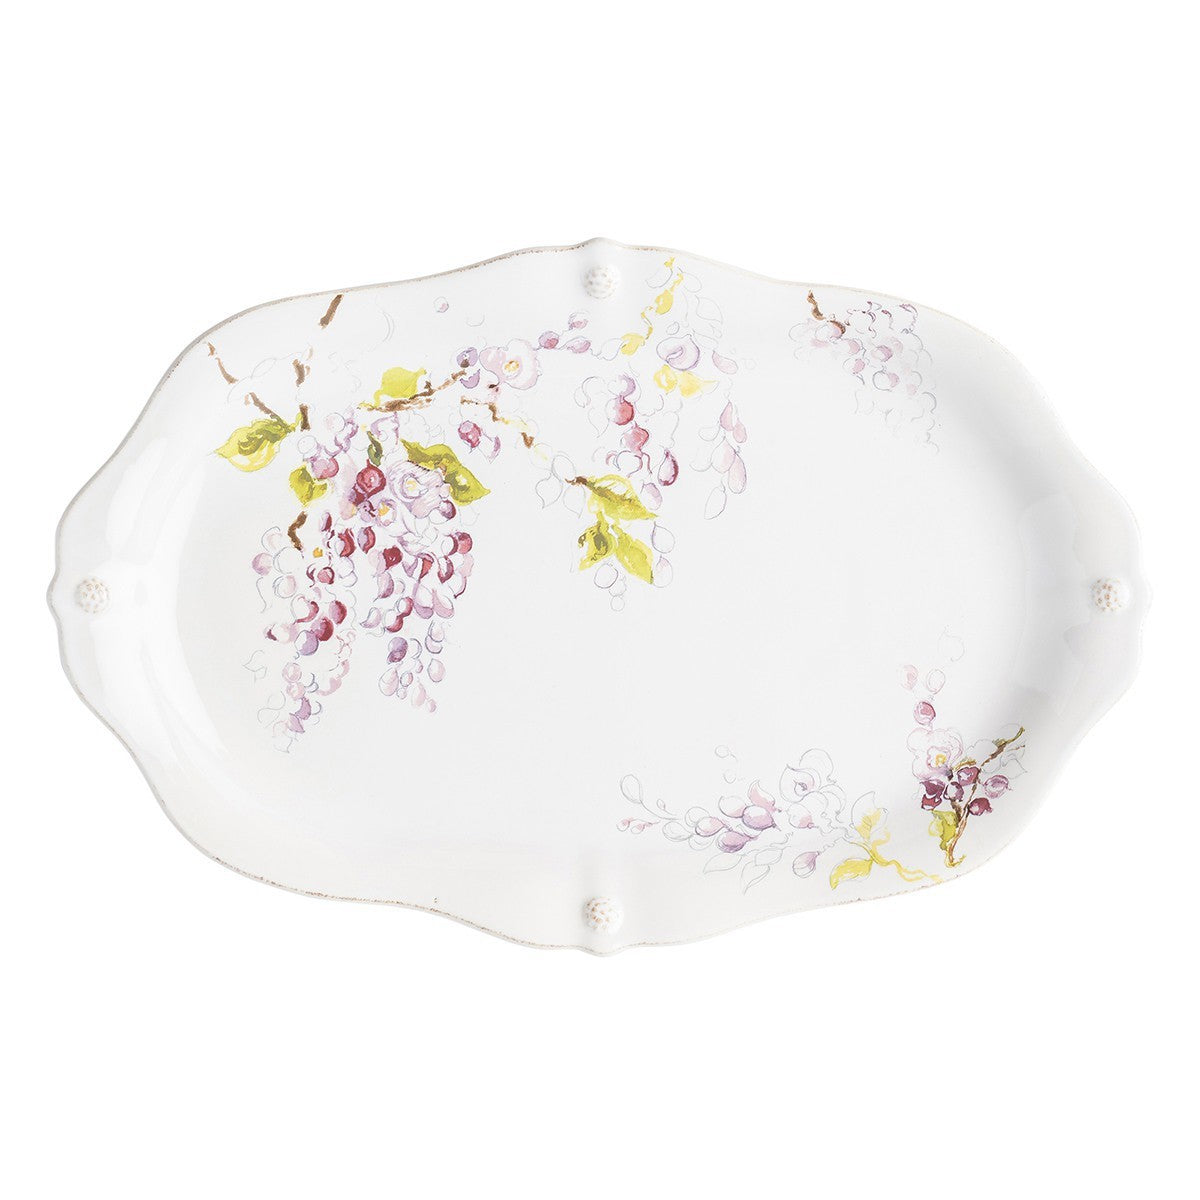 Berry & Thread Floral Sketch 16” Wisteria Platter